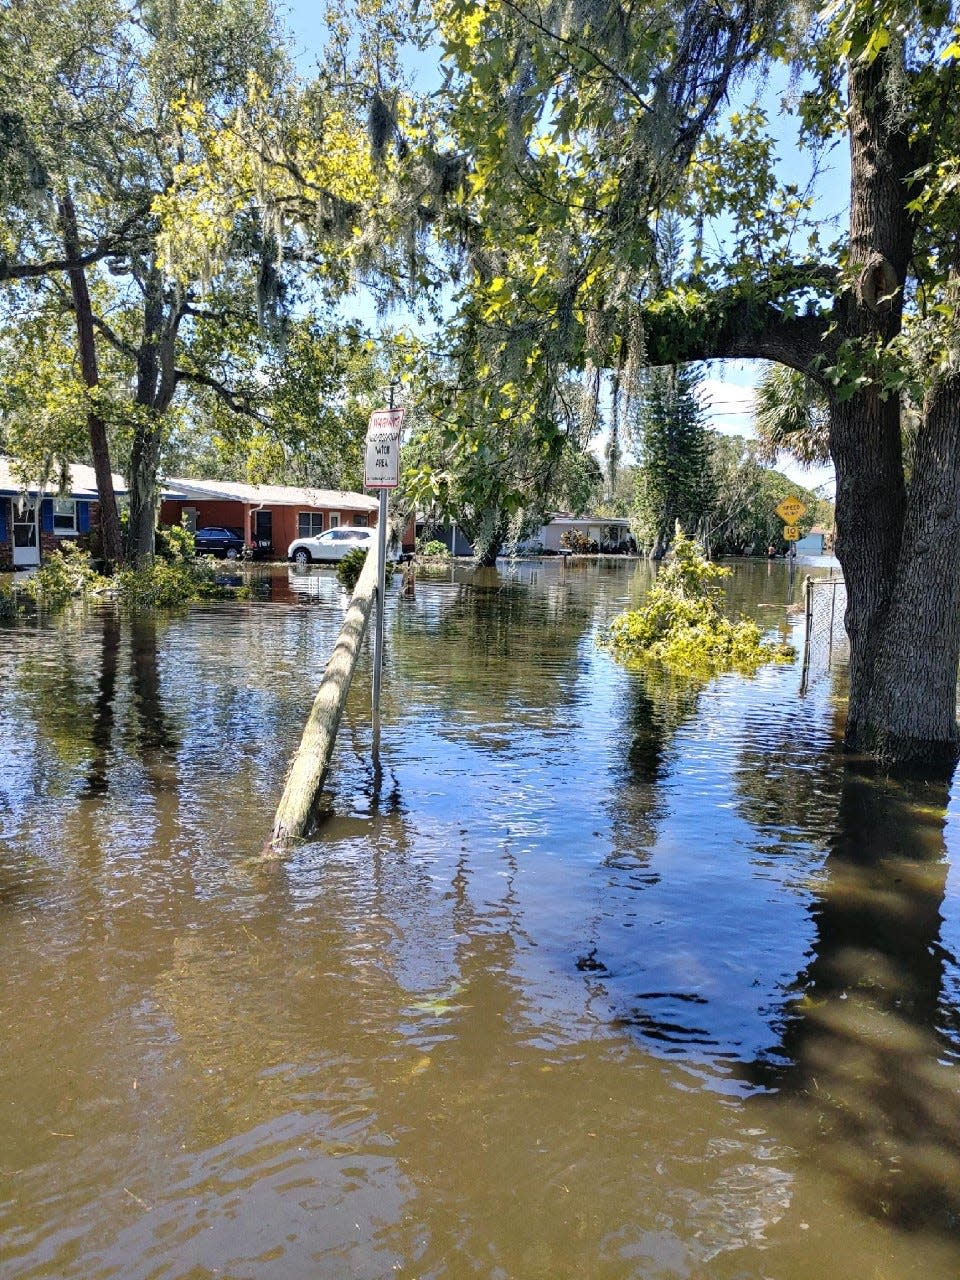 Daytona Beach's Midtown neighborhood was inundated with floodwater that rose as high as five feet in some areas of the community between Nova Road and Ridgewood Avenue. Pictured is Lockhart Street off of Kottle Circle as it looked Friday afternoon.